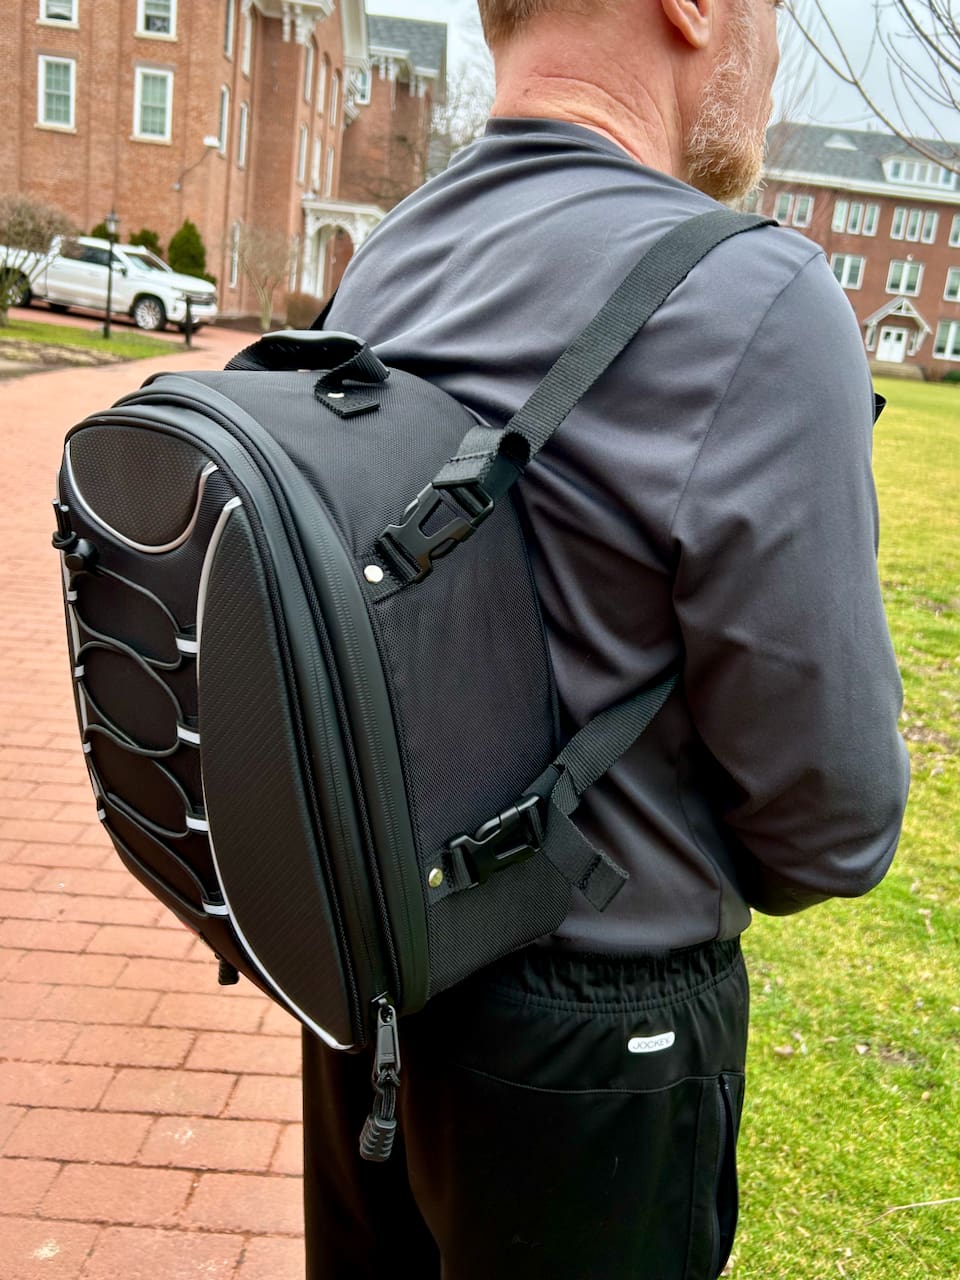 KemiMoto 30 liter Expandable Tail Bag as a backpack